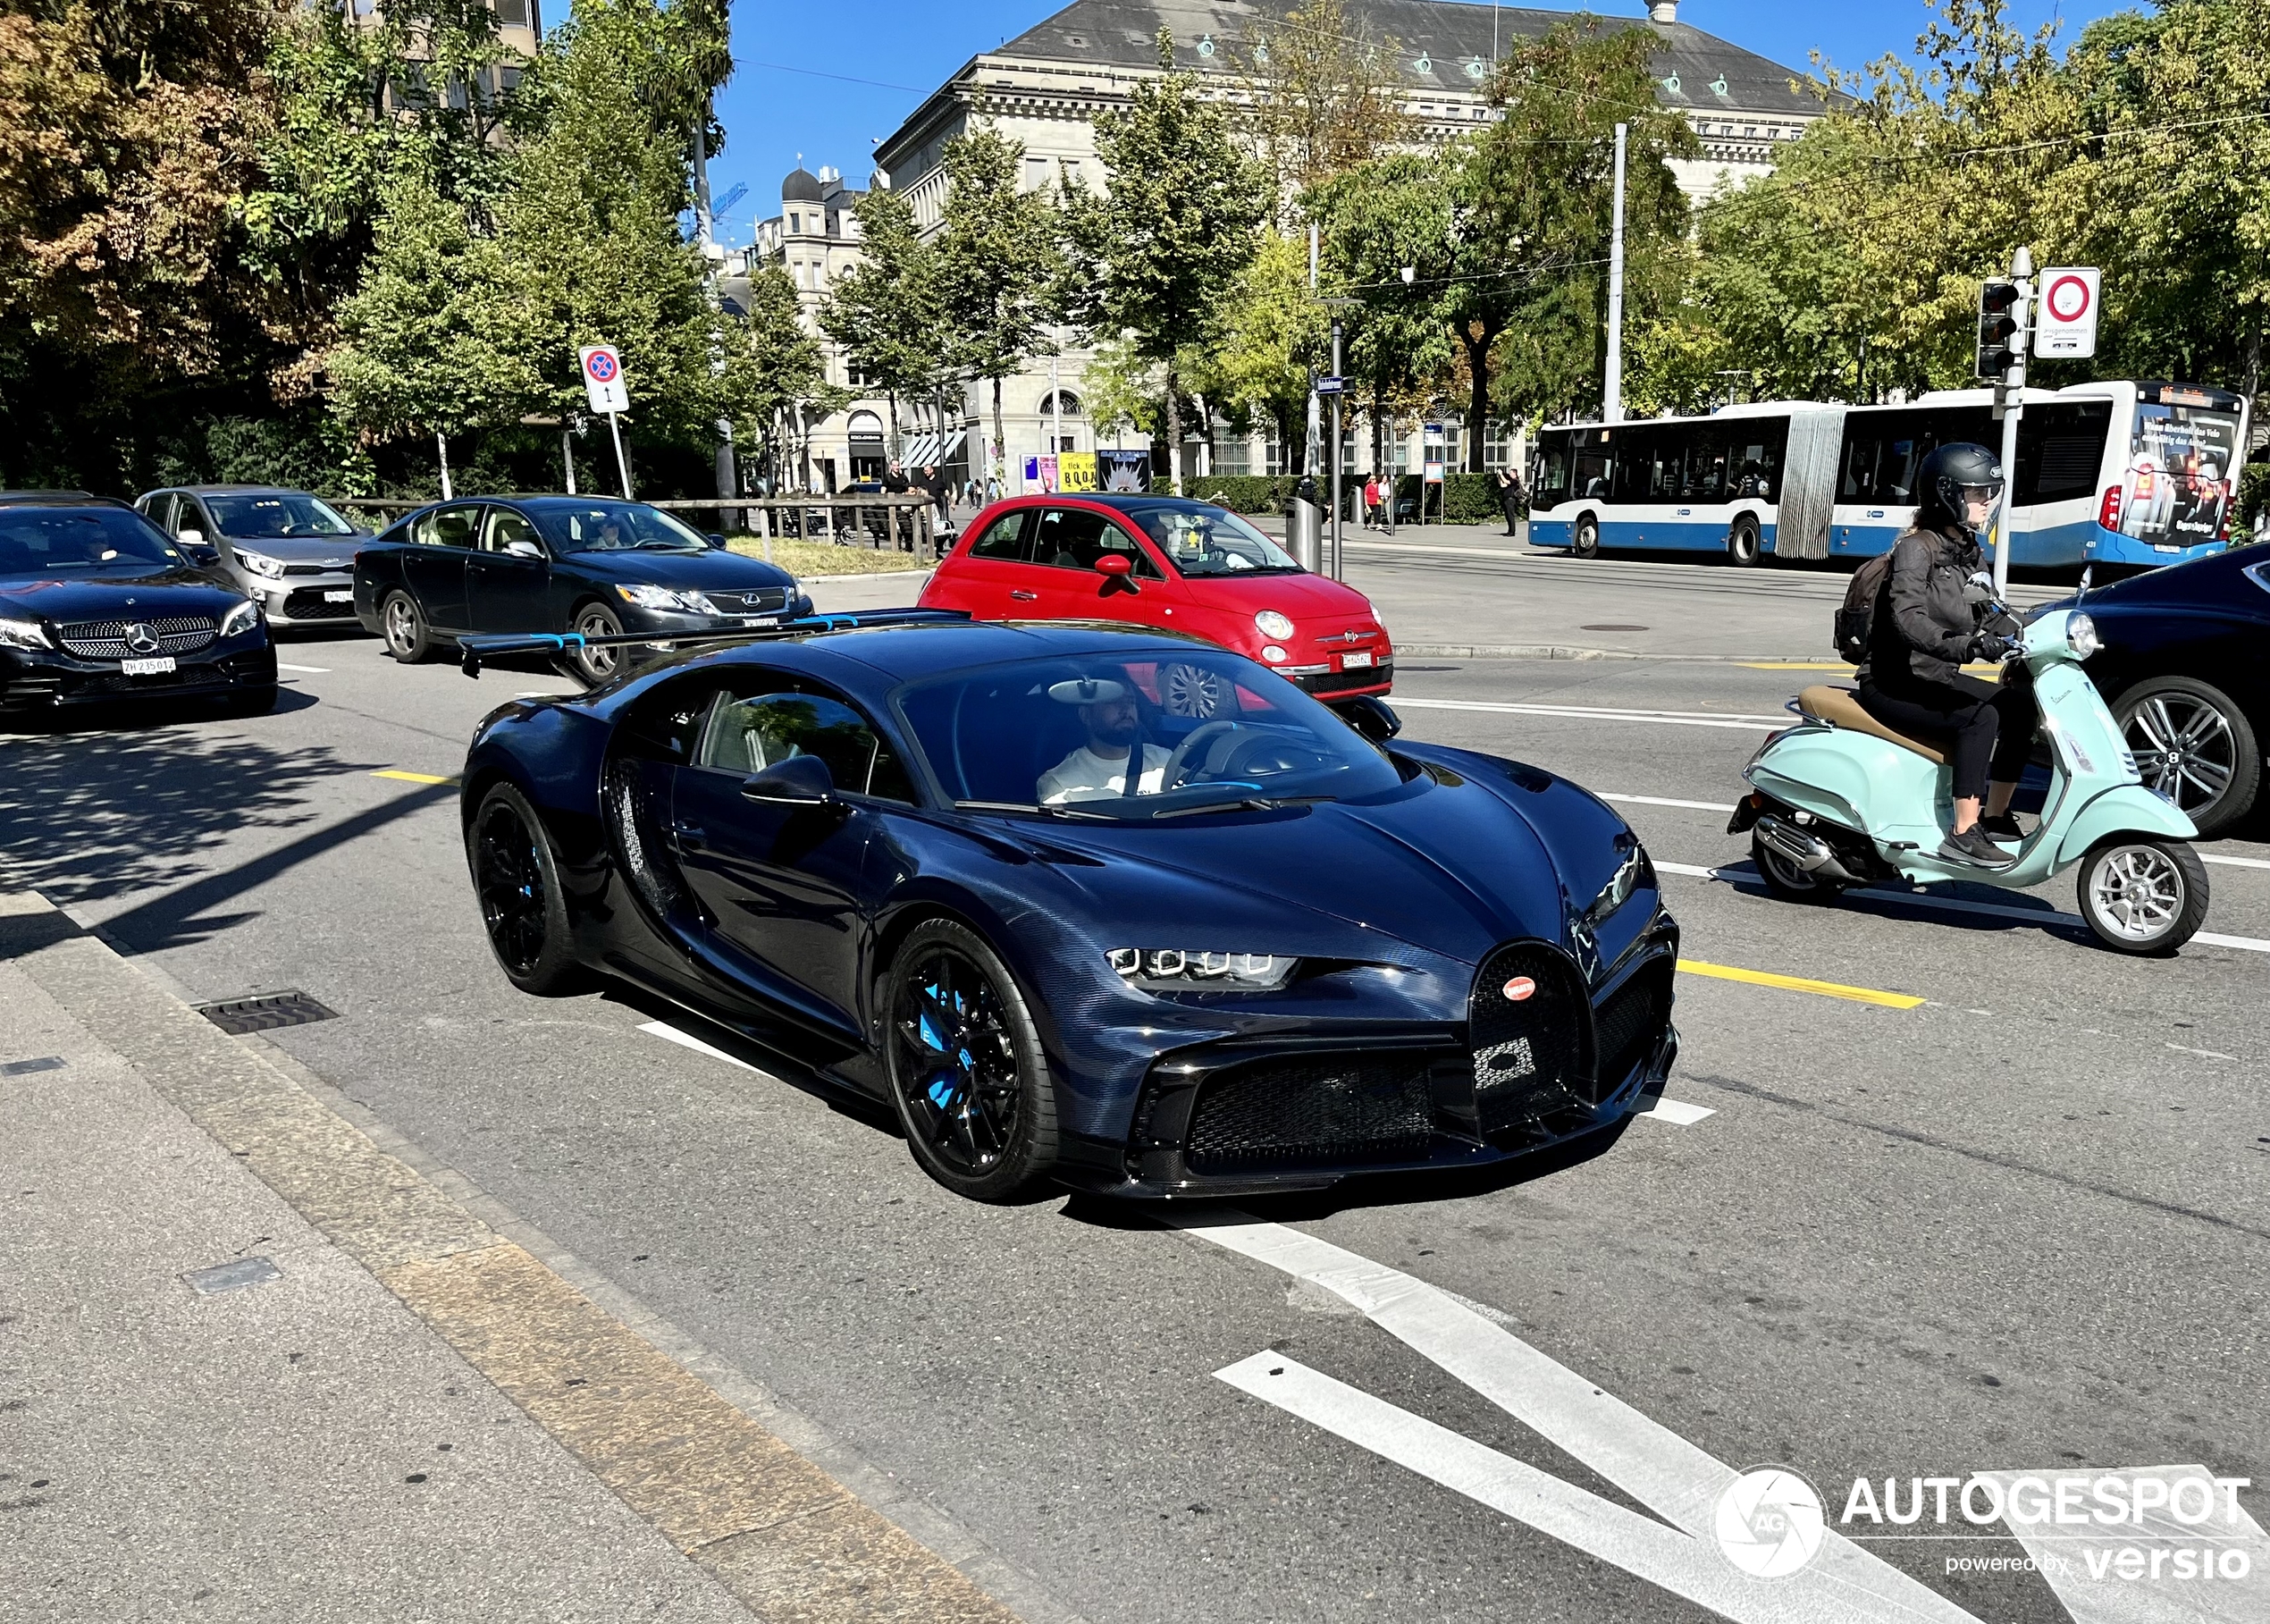 A Chiron Pur Sport shows up in Zürich